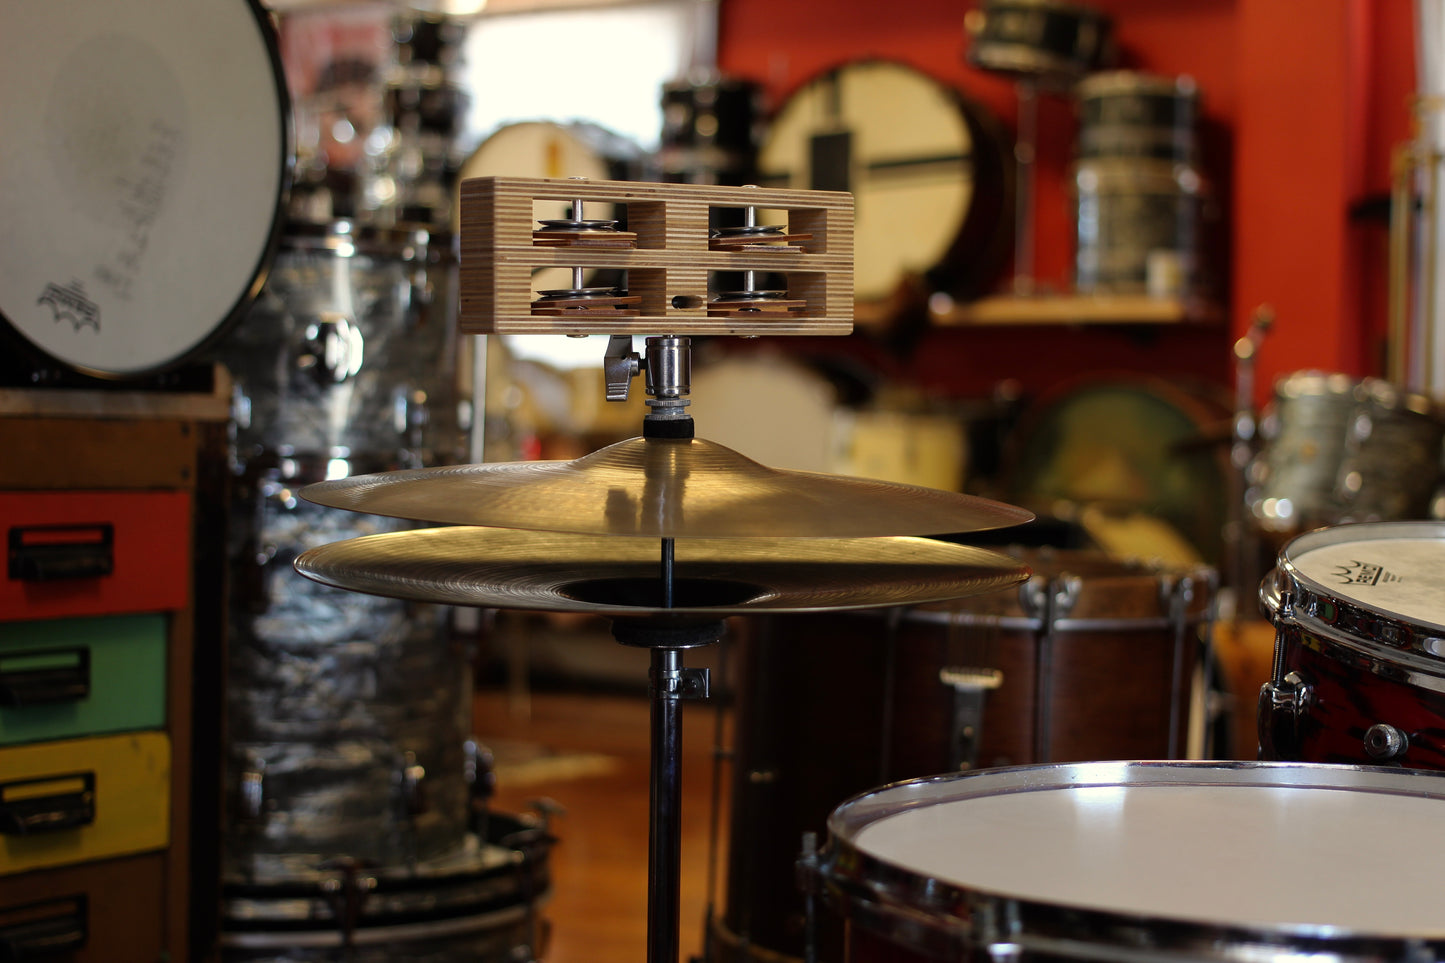 Index Drums - The Hihat Tambourine Ringo Used in the Peter Jackson Documentary “Get Back” (a Tribute)